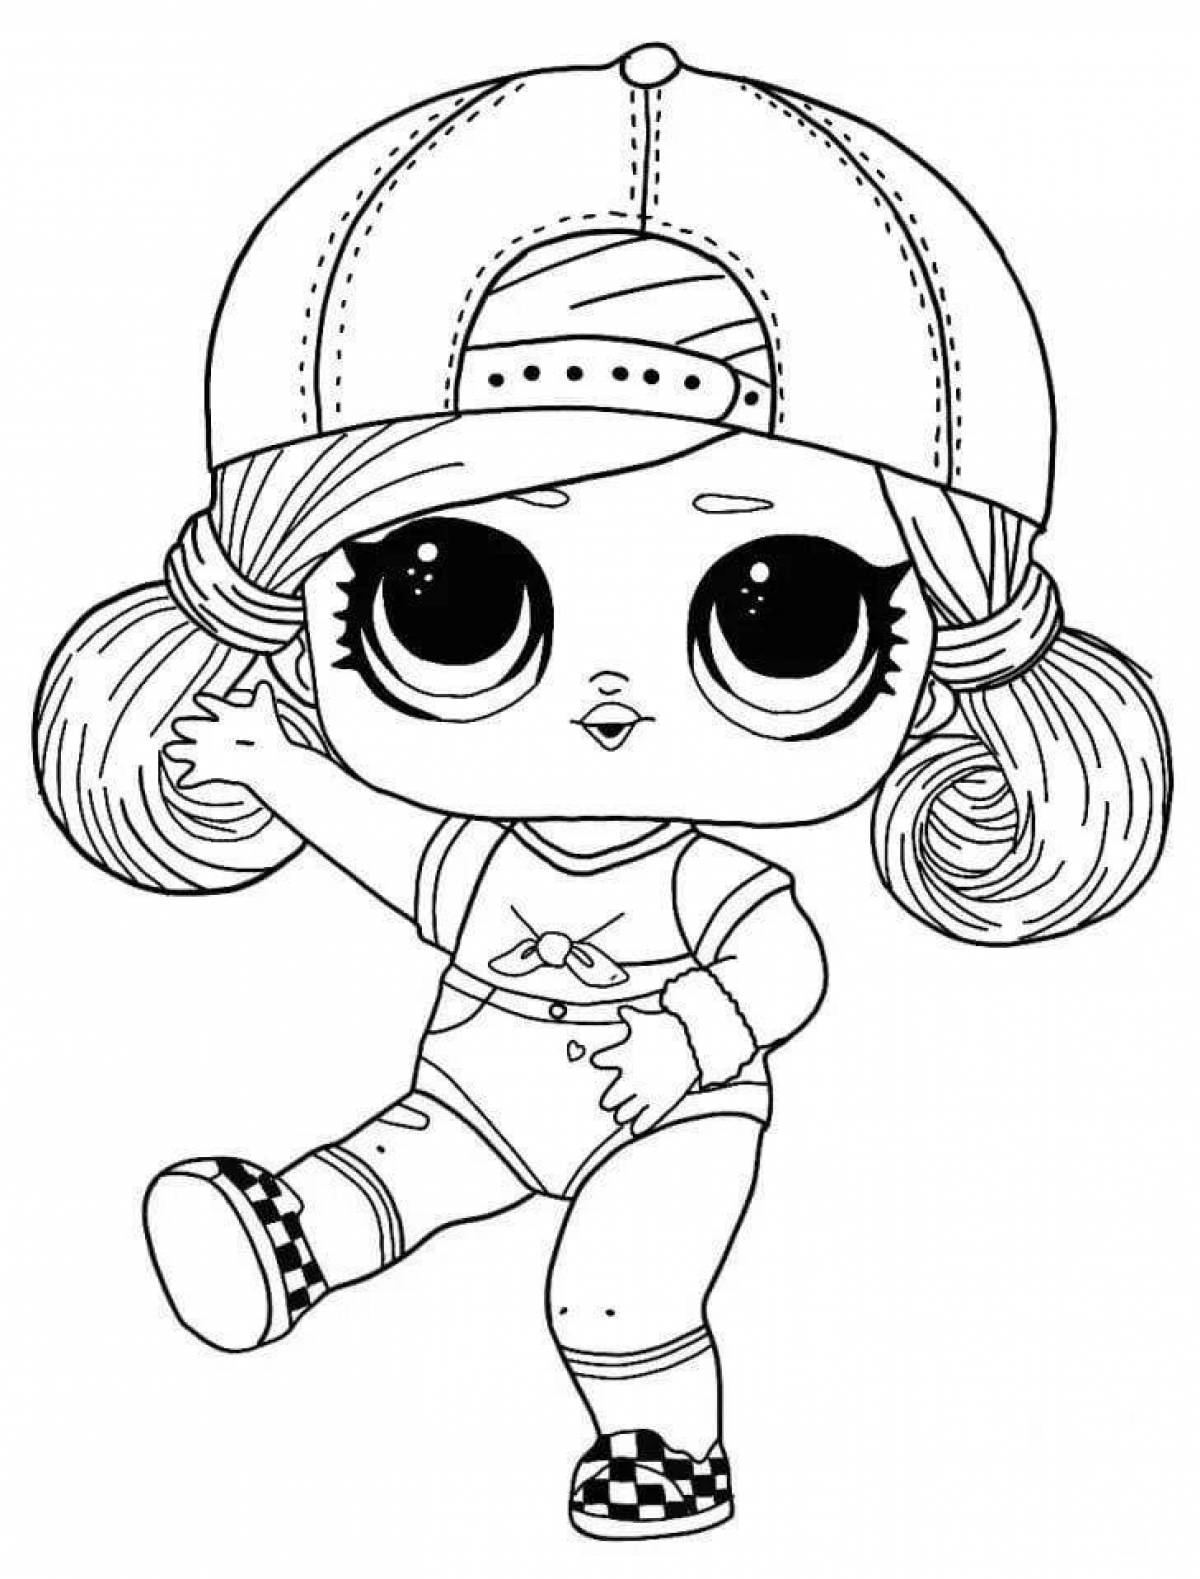 Funny lol doll coloring book